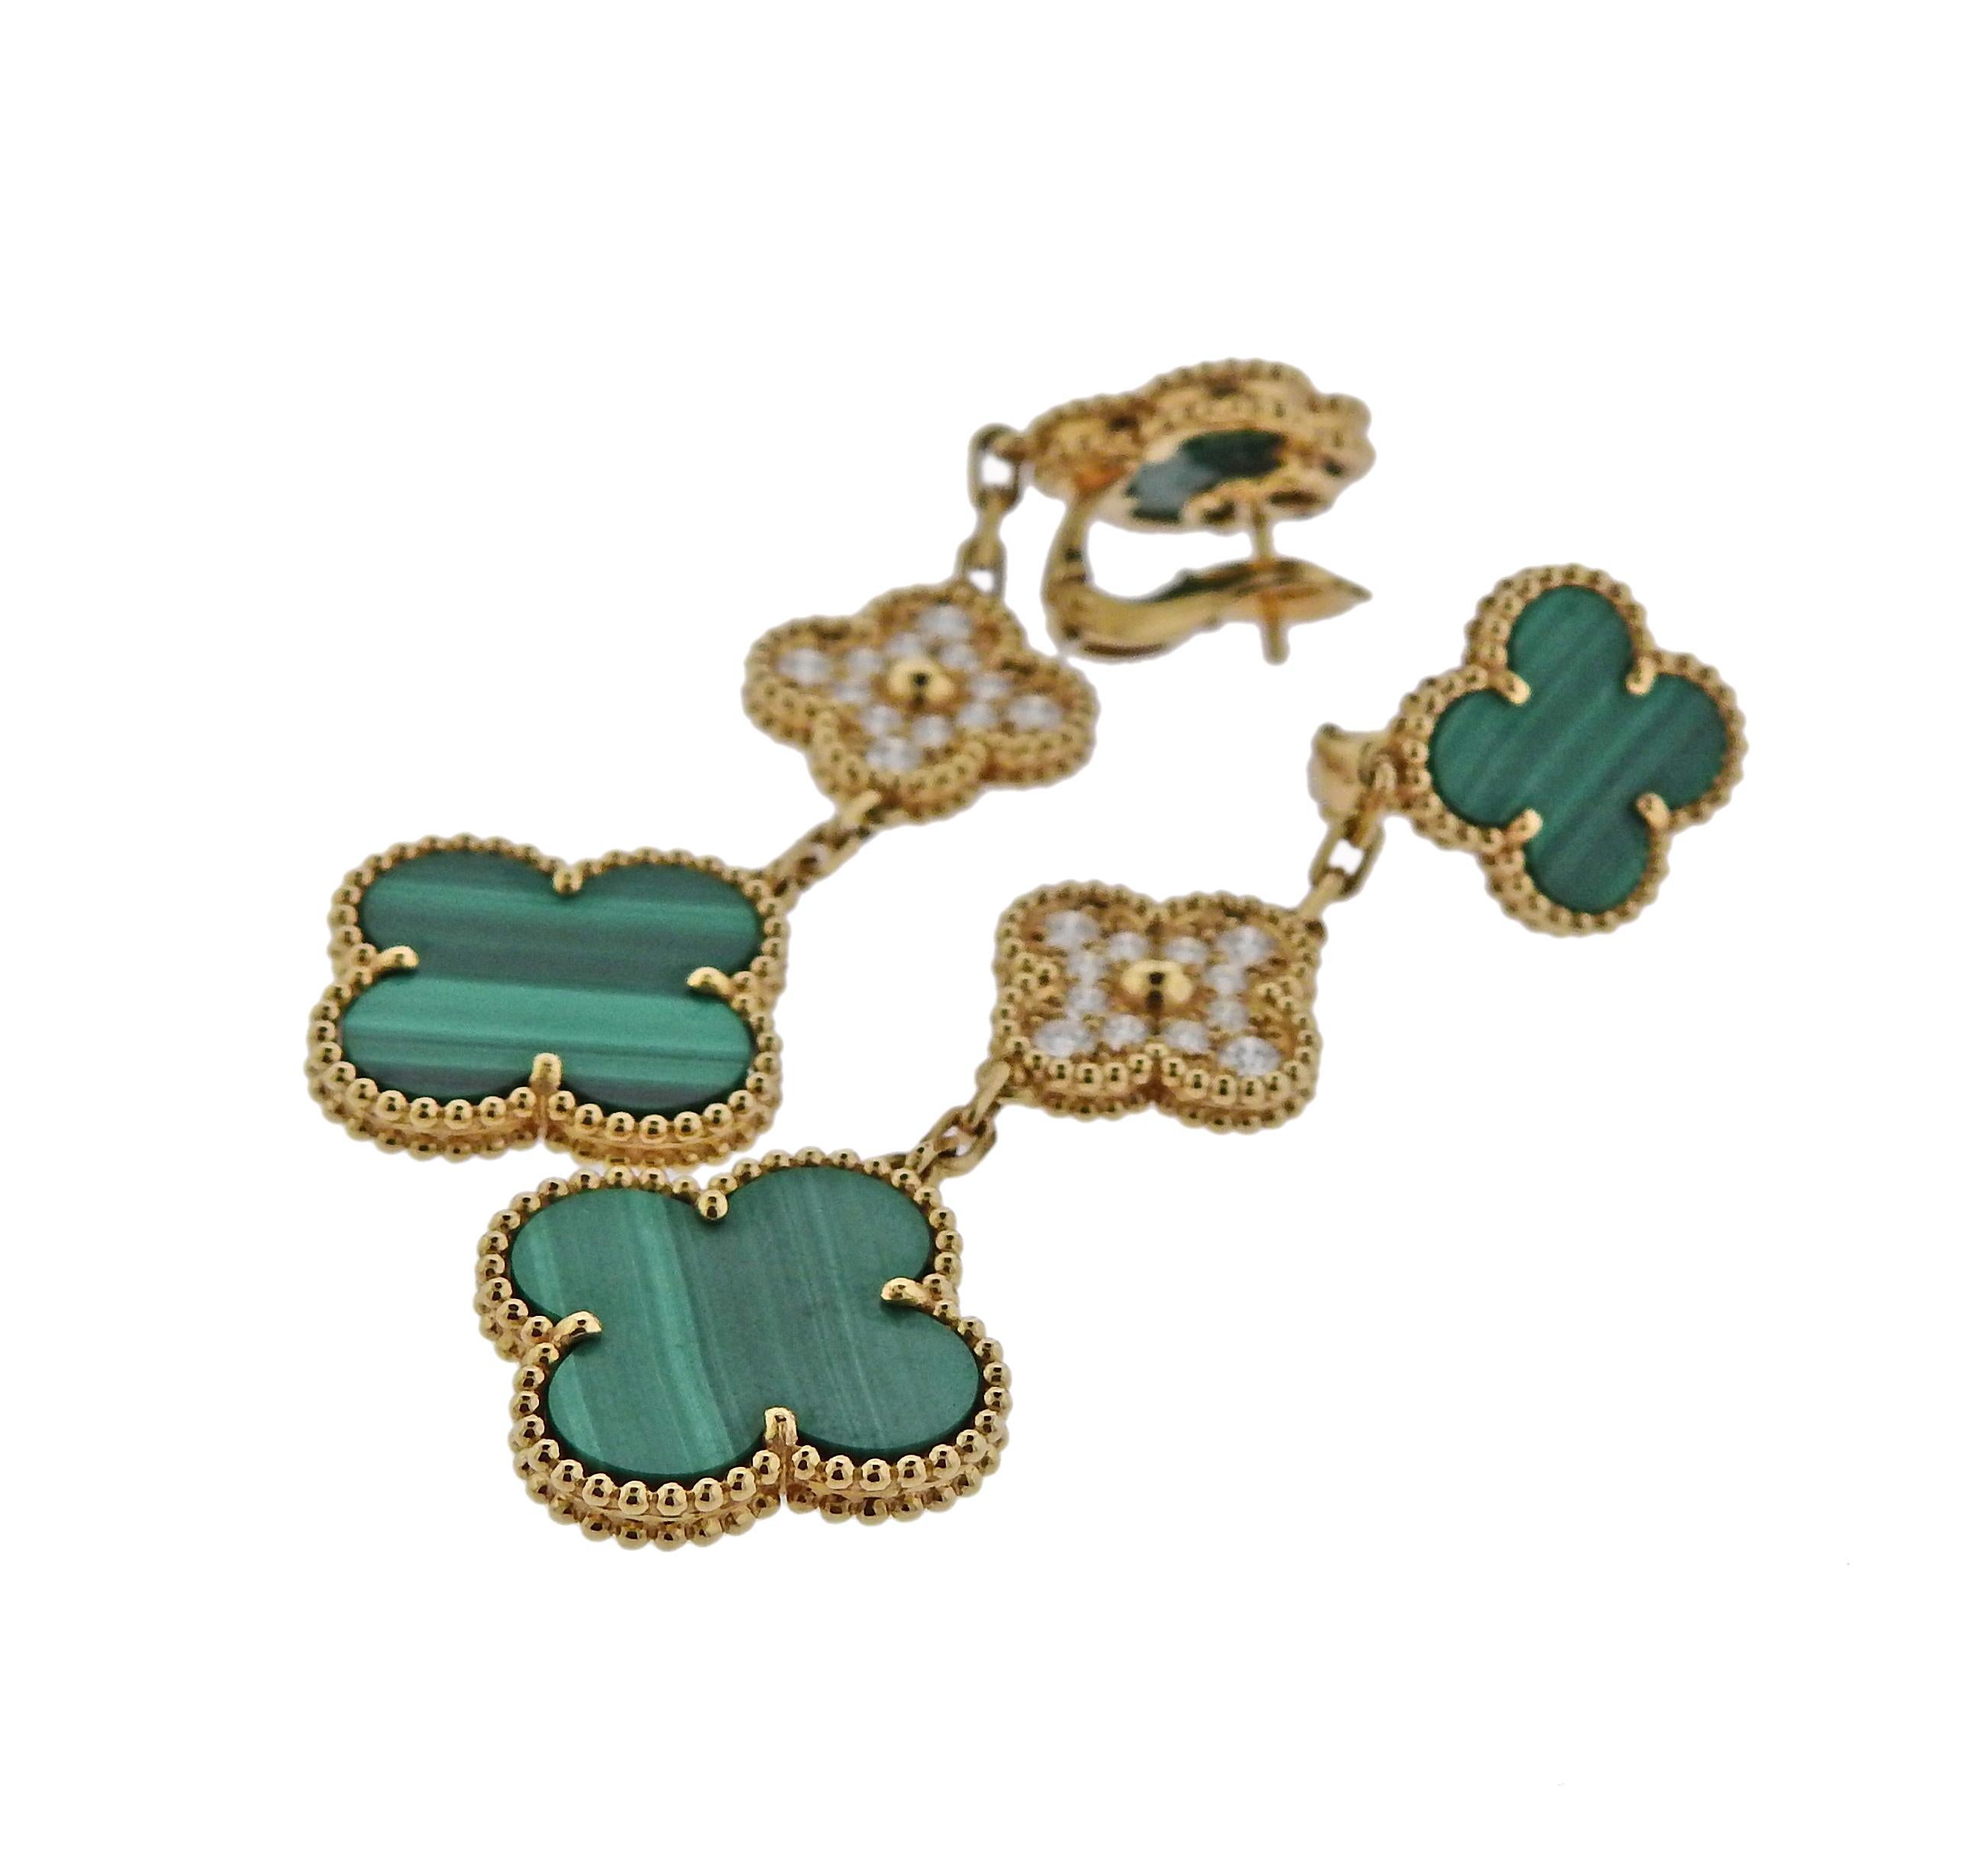 Pair of iconic 18k gold Magic Alhambra earrings by Van Cleef & Arpels, set with 0.96ctw in FG/VVS diamonds and malachite. Retail $16100. Come with box and COA. Earrings are 68mm long, bottom motifs are 20mm x 20mm and weigh 21 grams. 